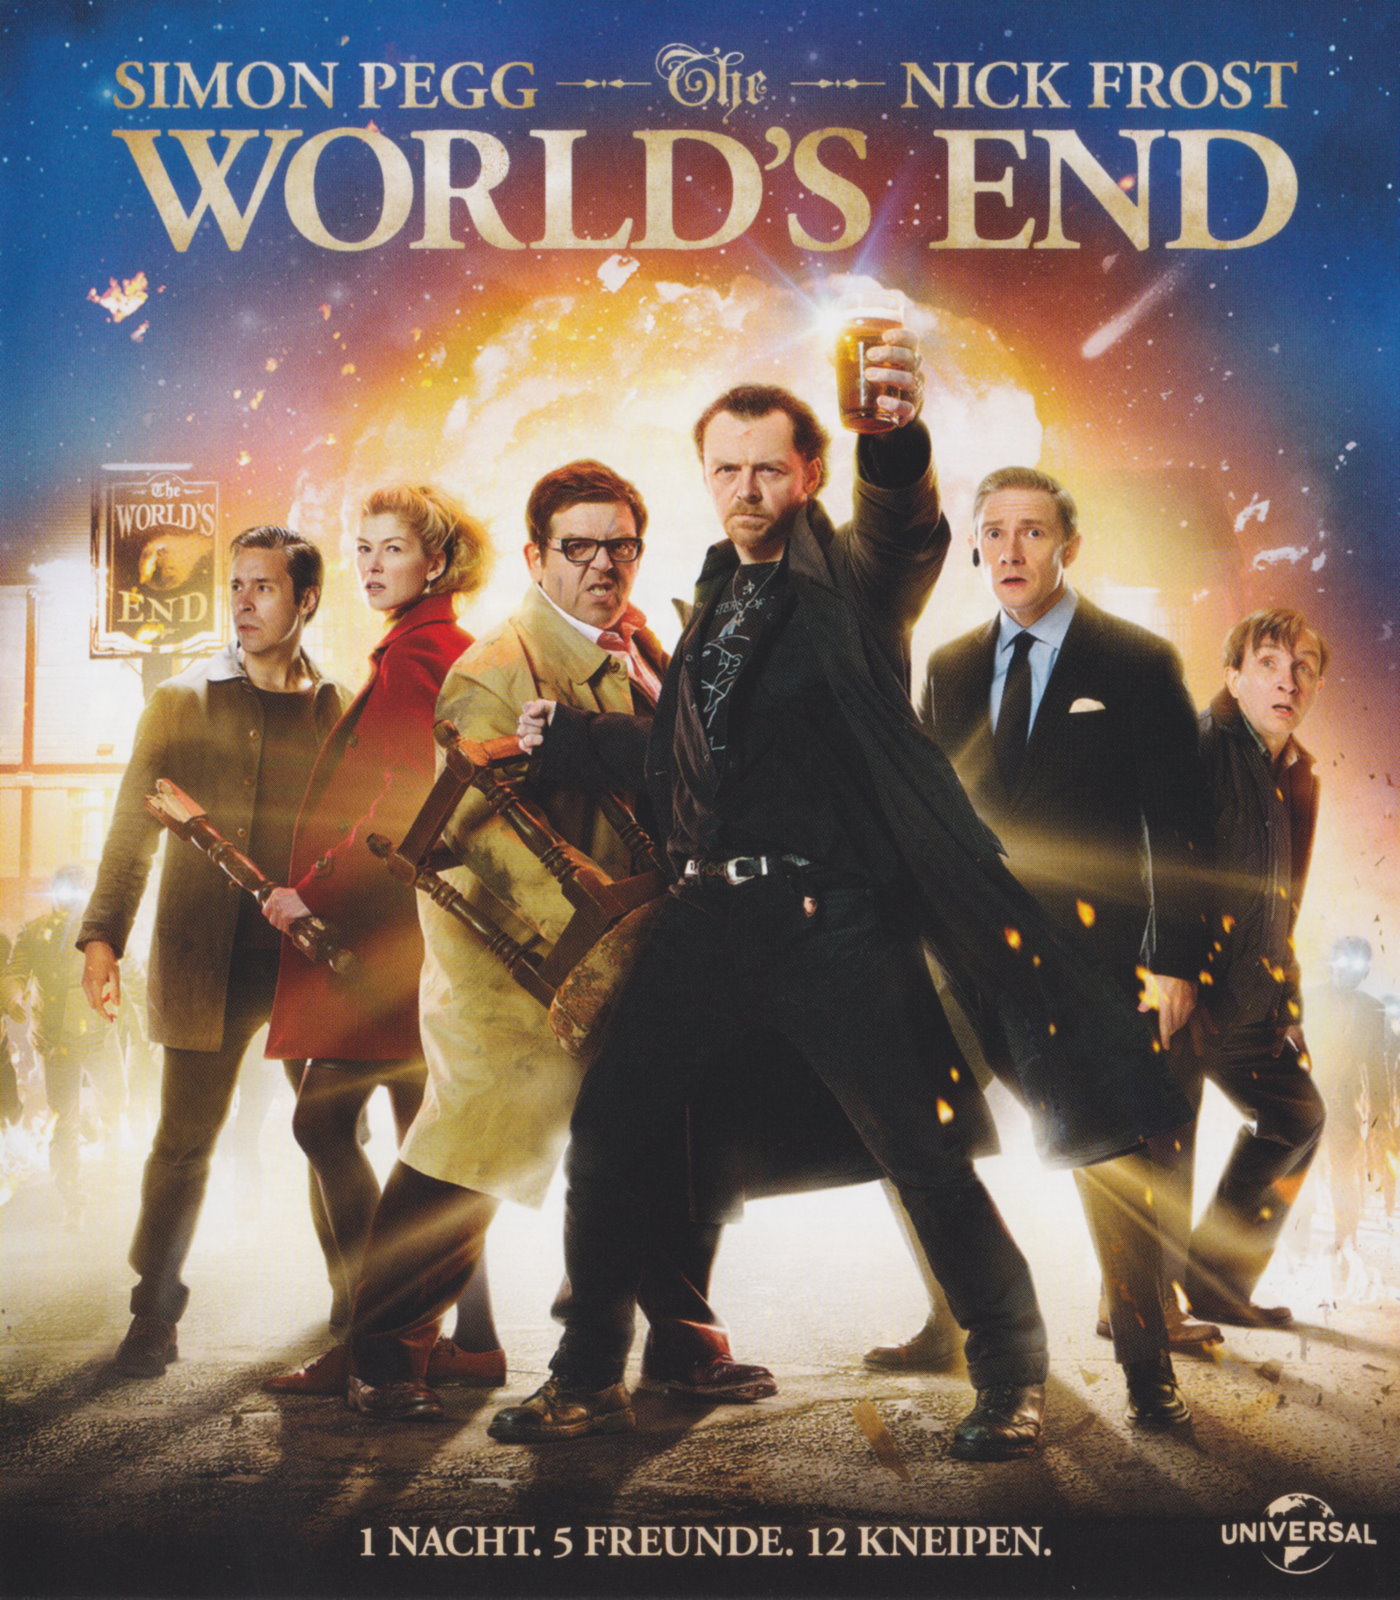 Cover - The World's End.jpg